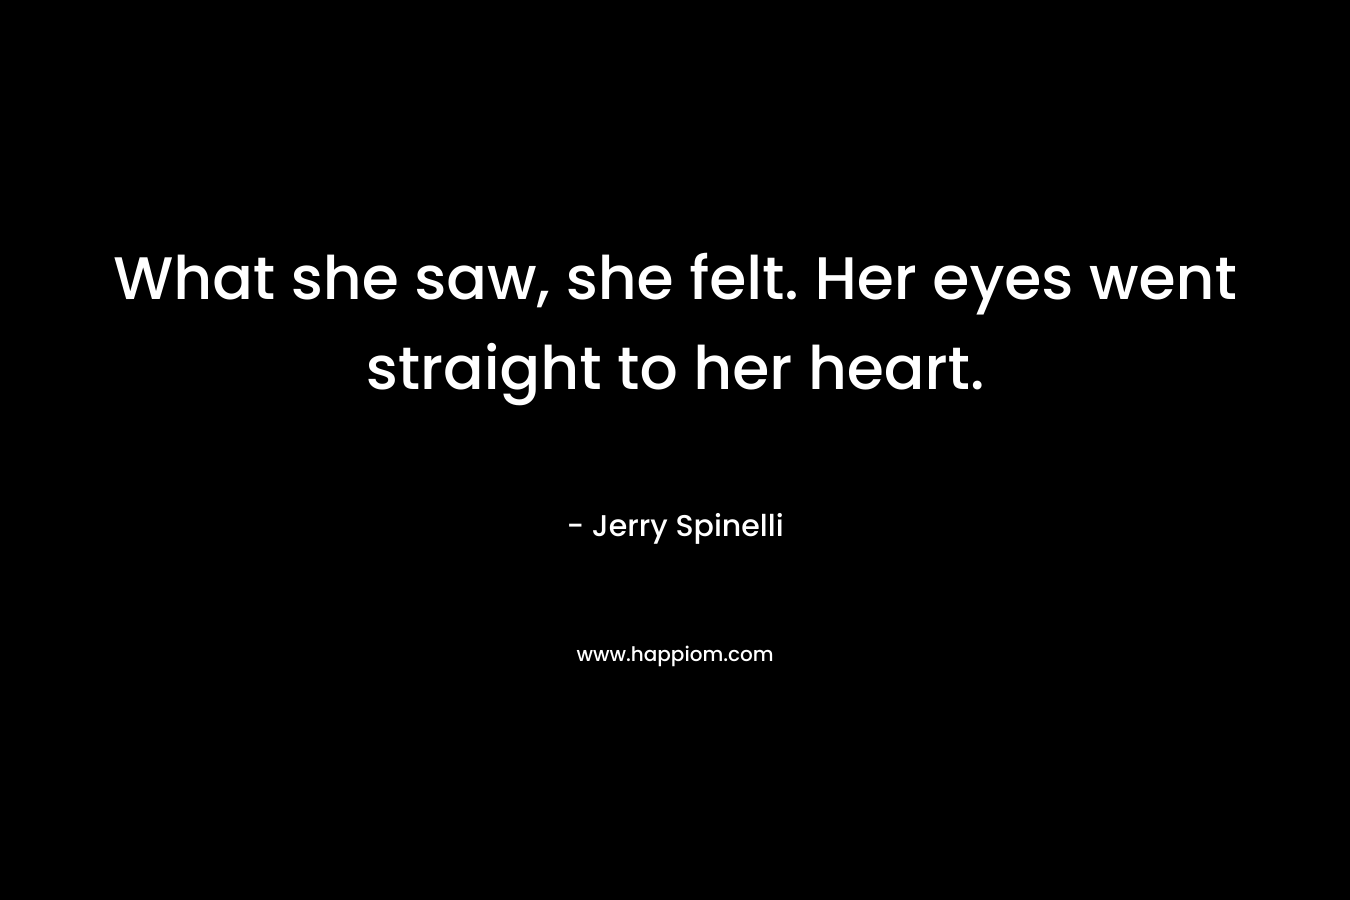 What she saw, she felt. Her eyes went straight to her heart. – Jerry Spinelli